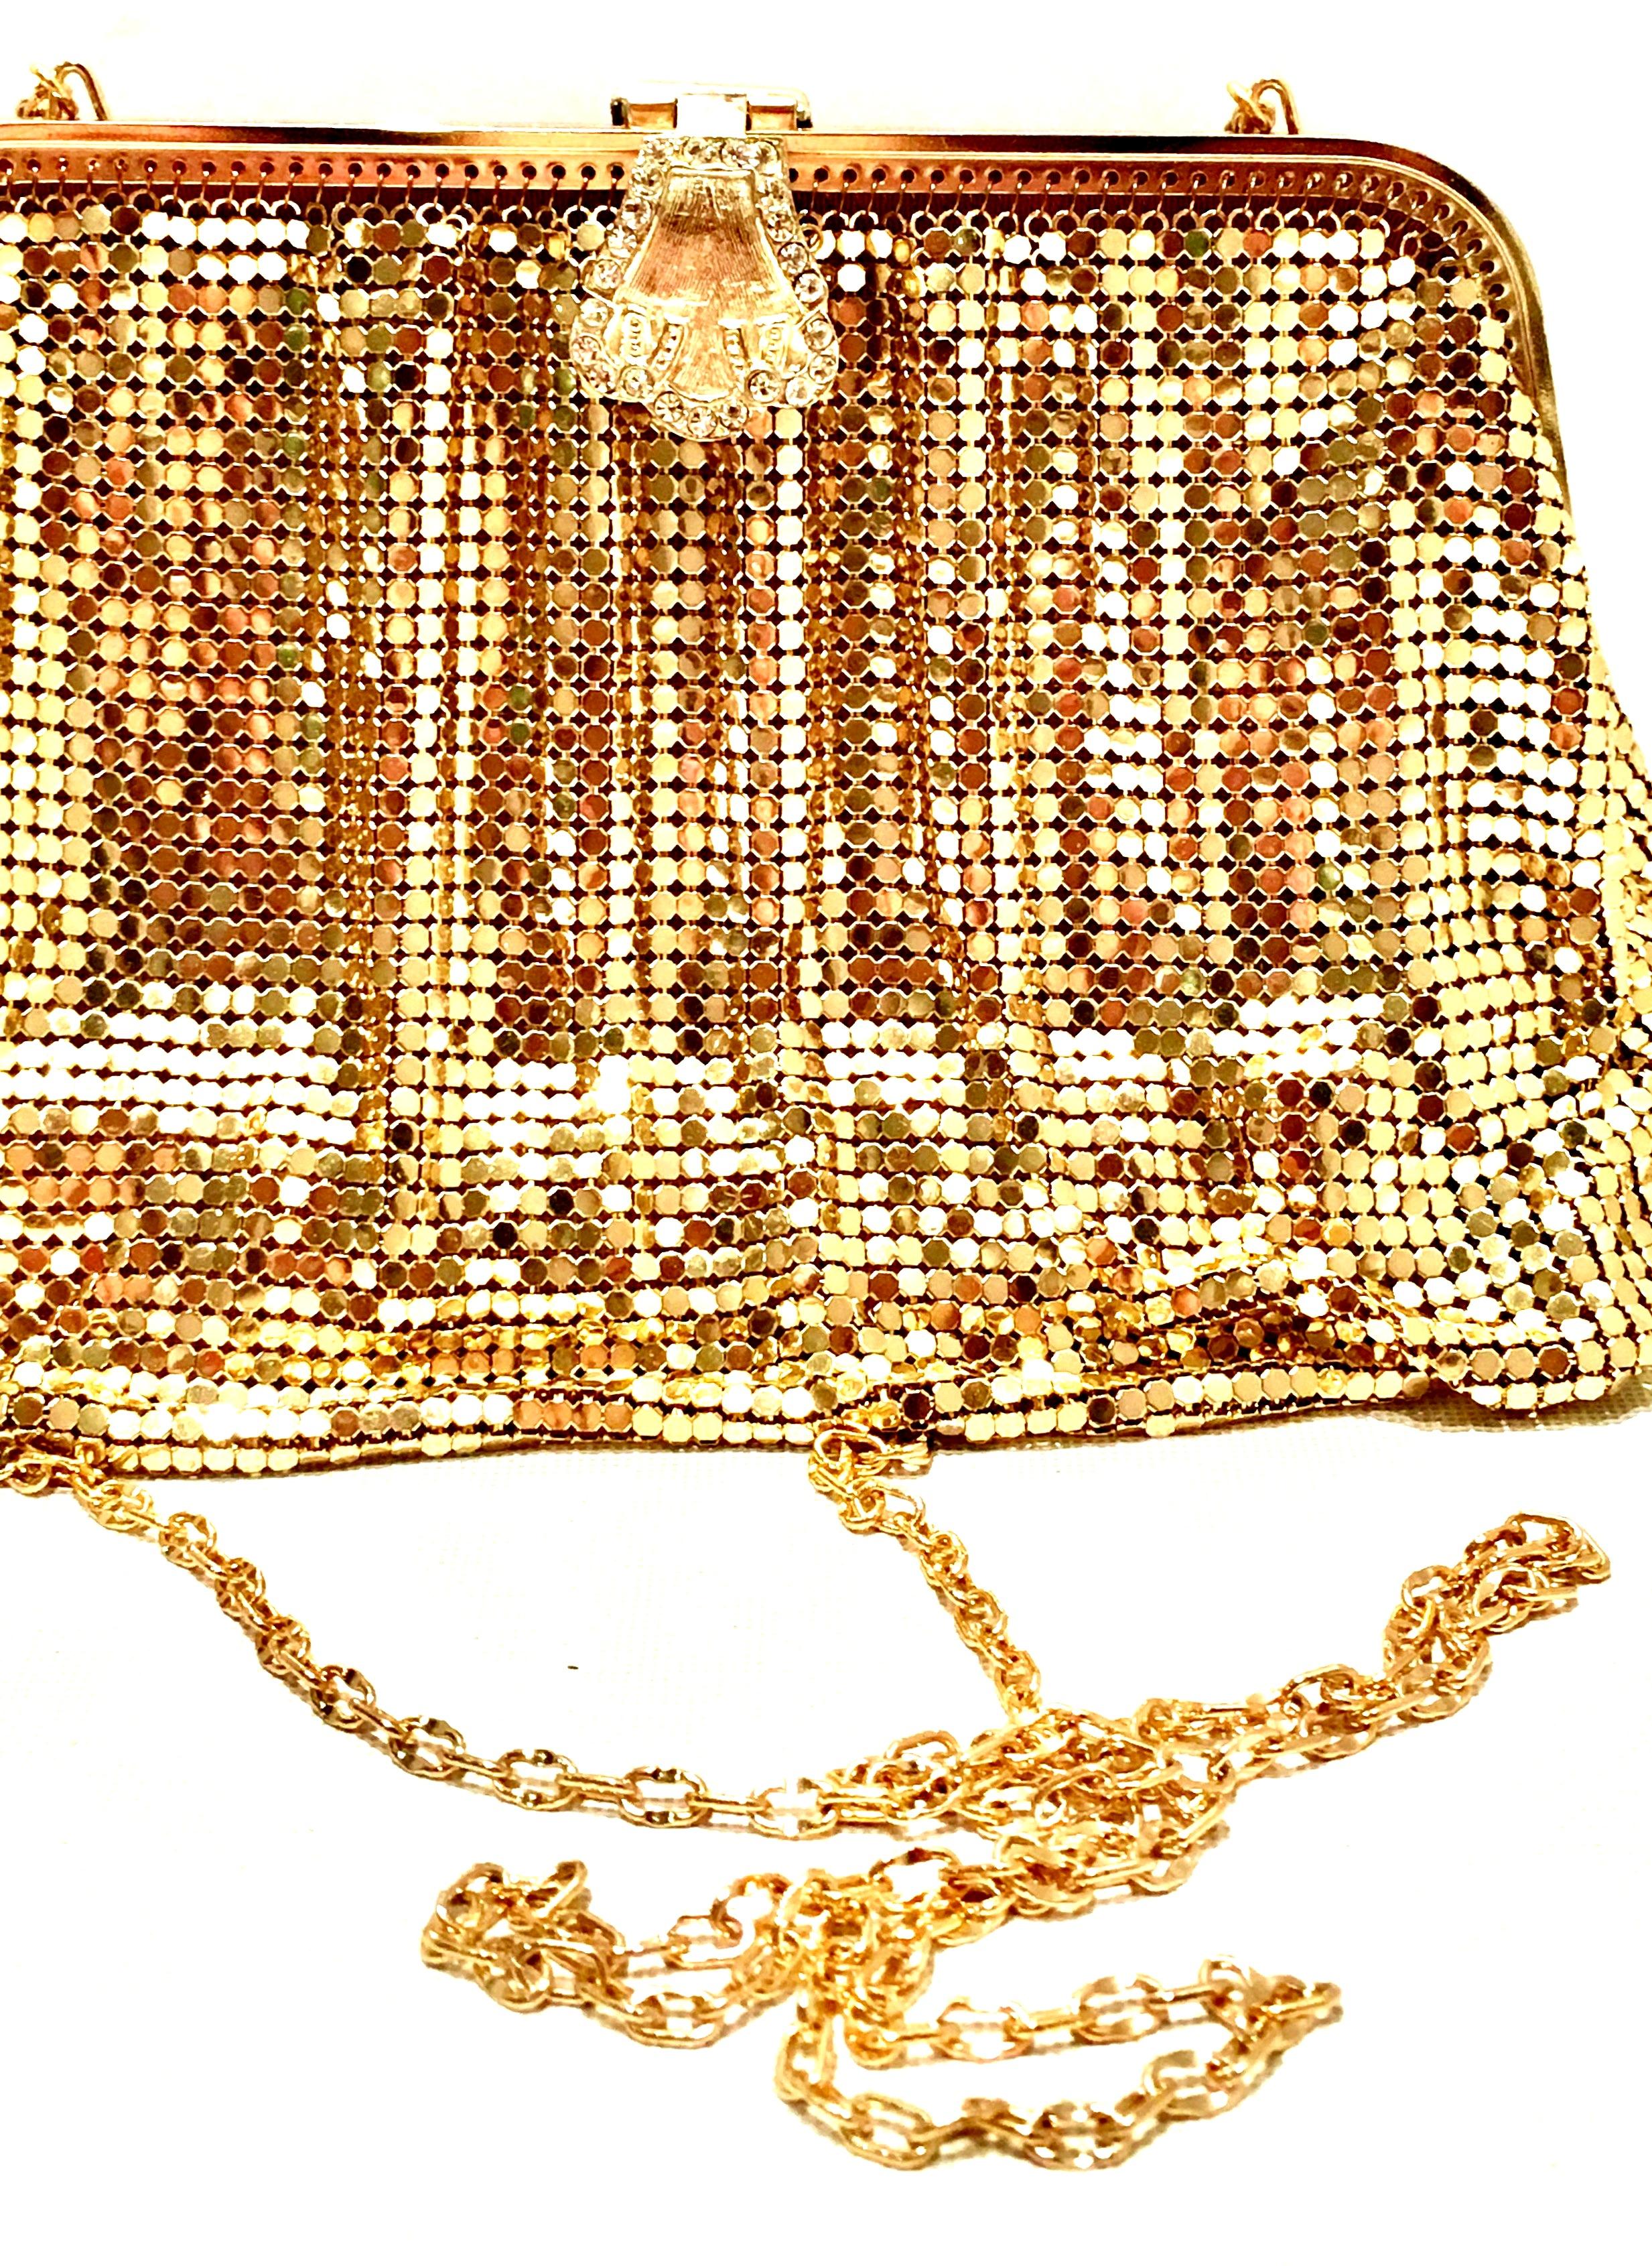 20th Century Gold Metal Mesh & Swarovksi Crystal Evening Bag By, Whiting & Davis For Sale 2